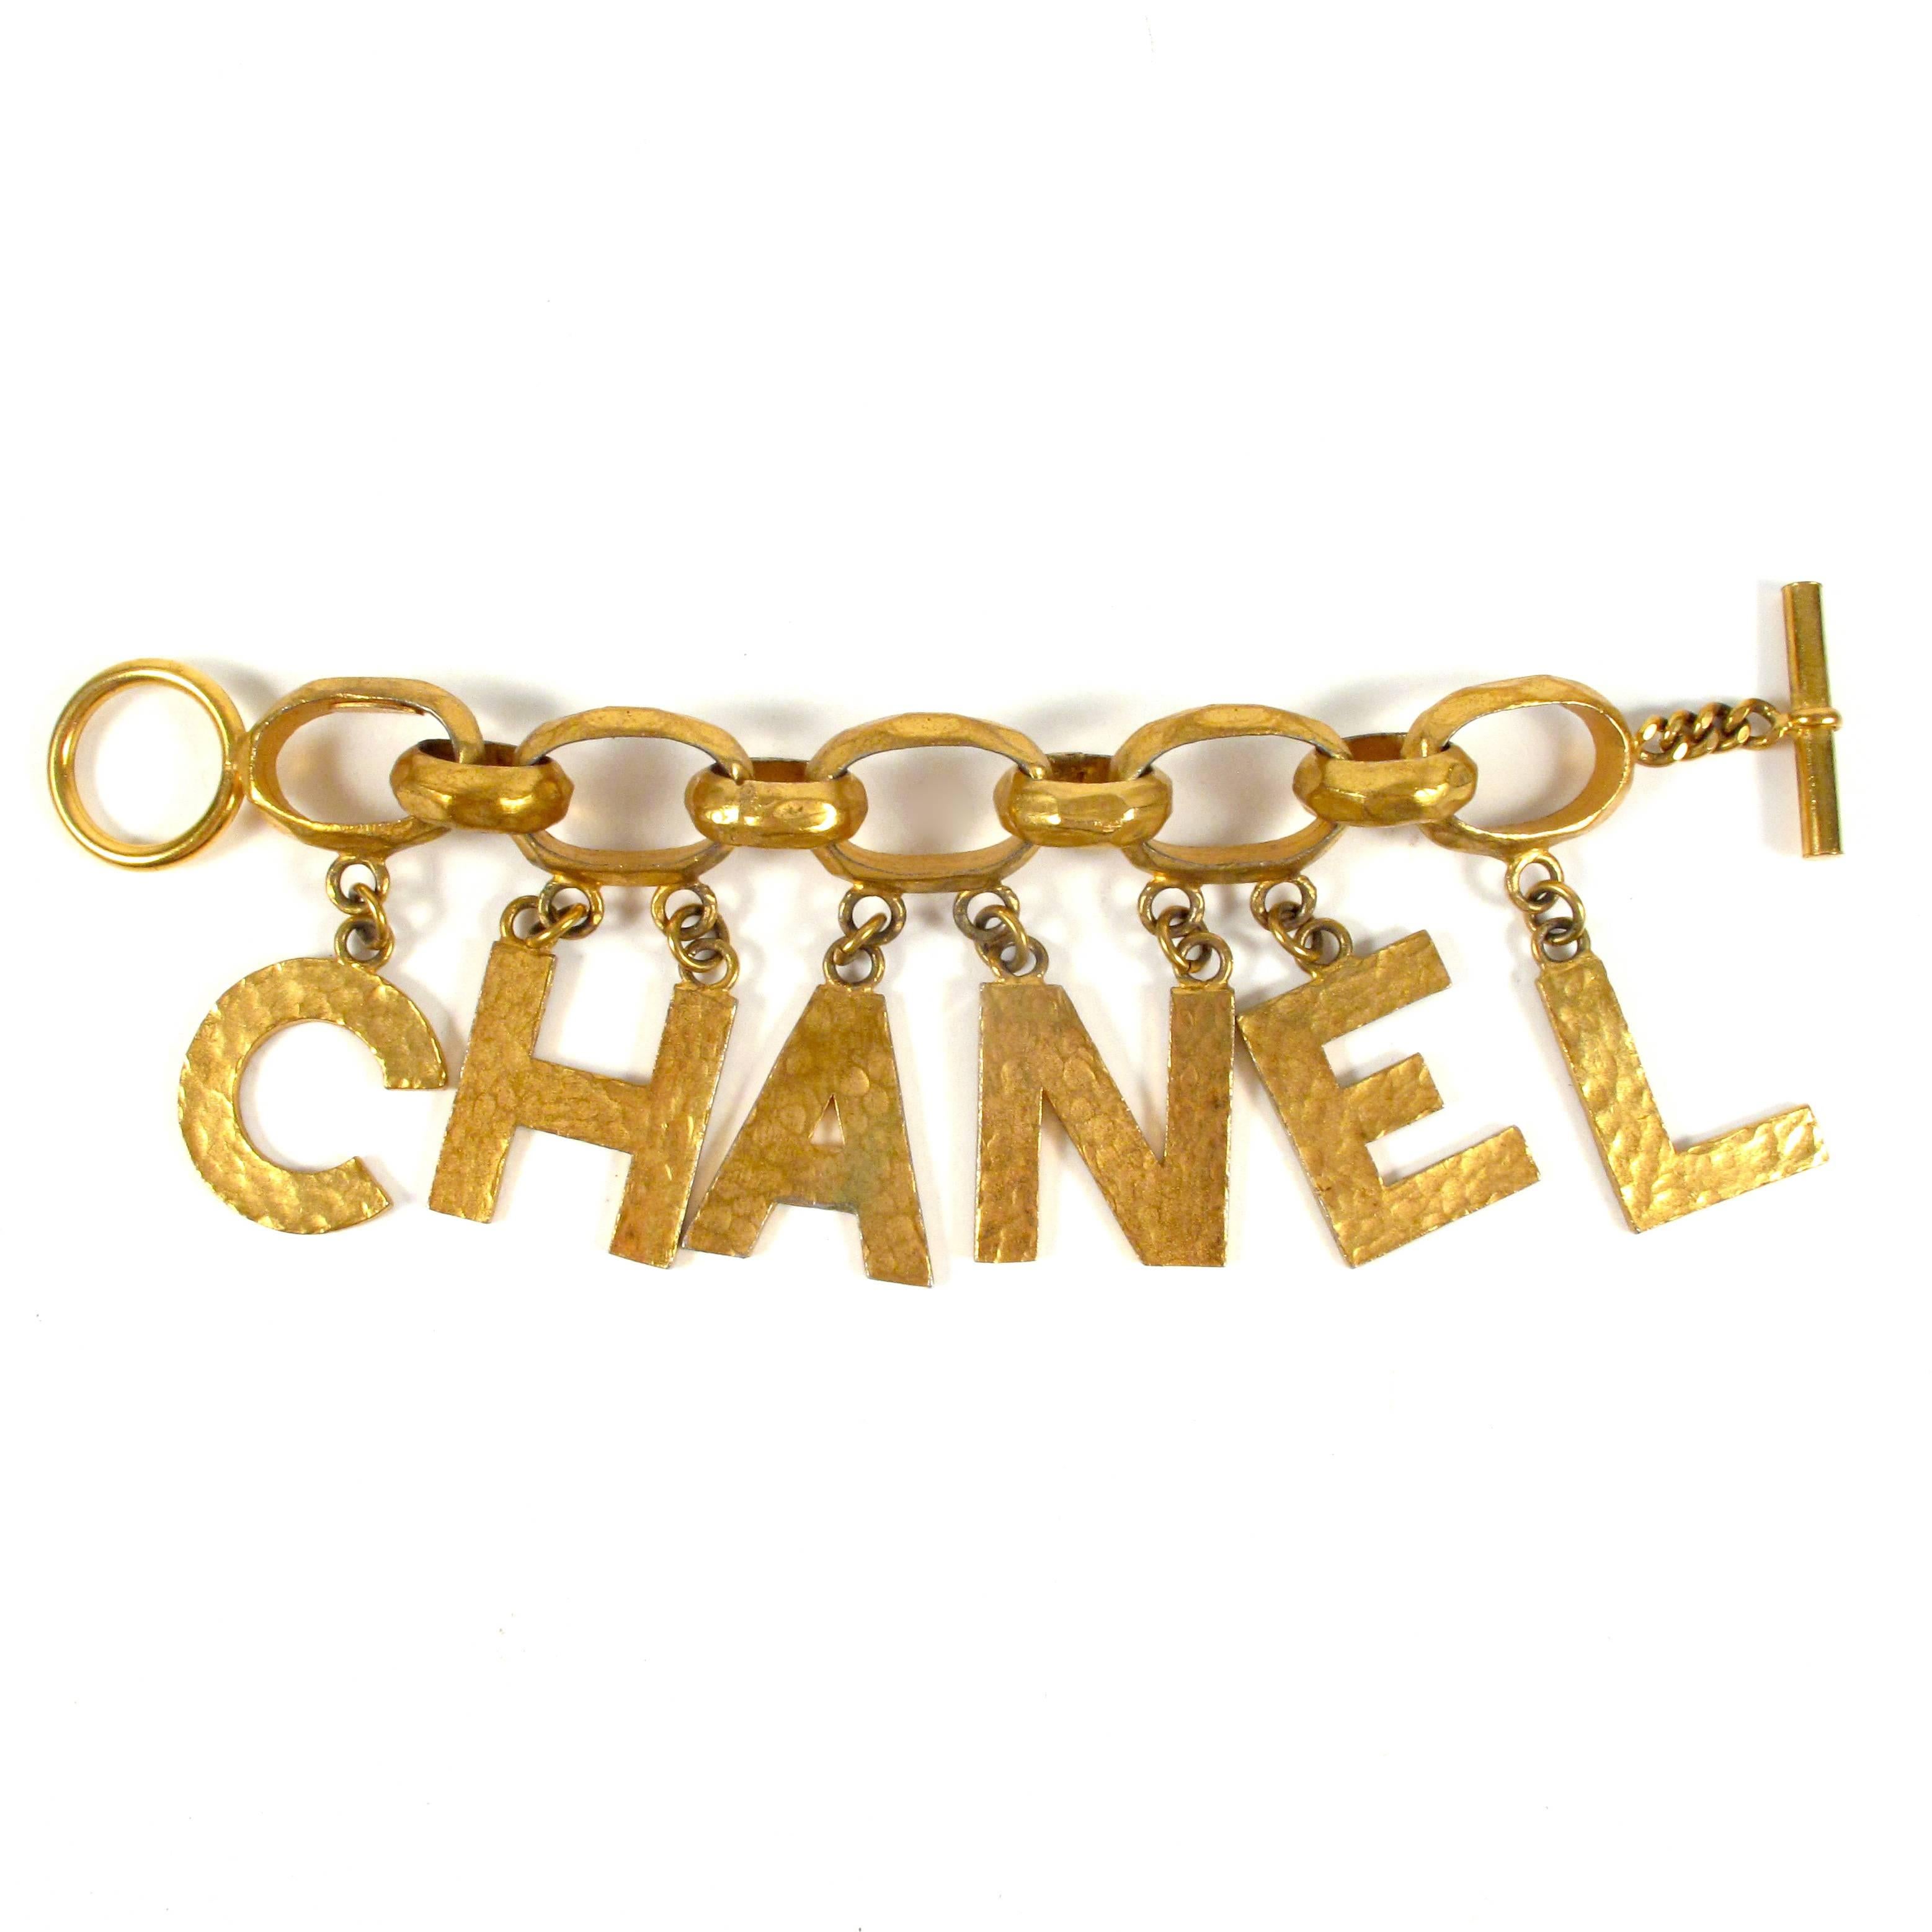 Chanel - Logo Charm Bracelet

Color: Gold

Material: Metal 

------------------------------------------------------------

Details:

- gold tone hardware

- chanel letter charms

- textured metal

- stamped 93P from the spring 1993